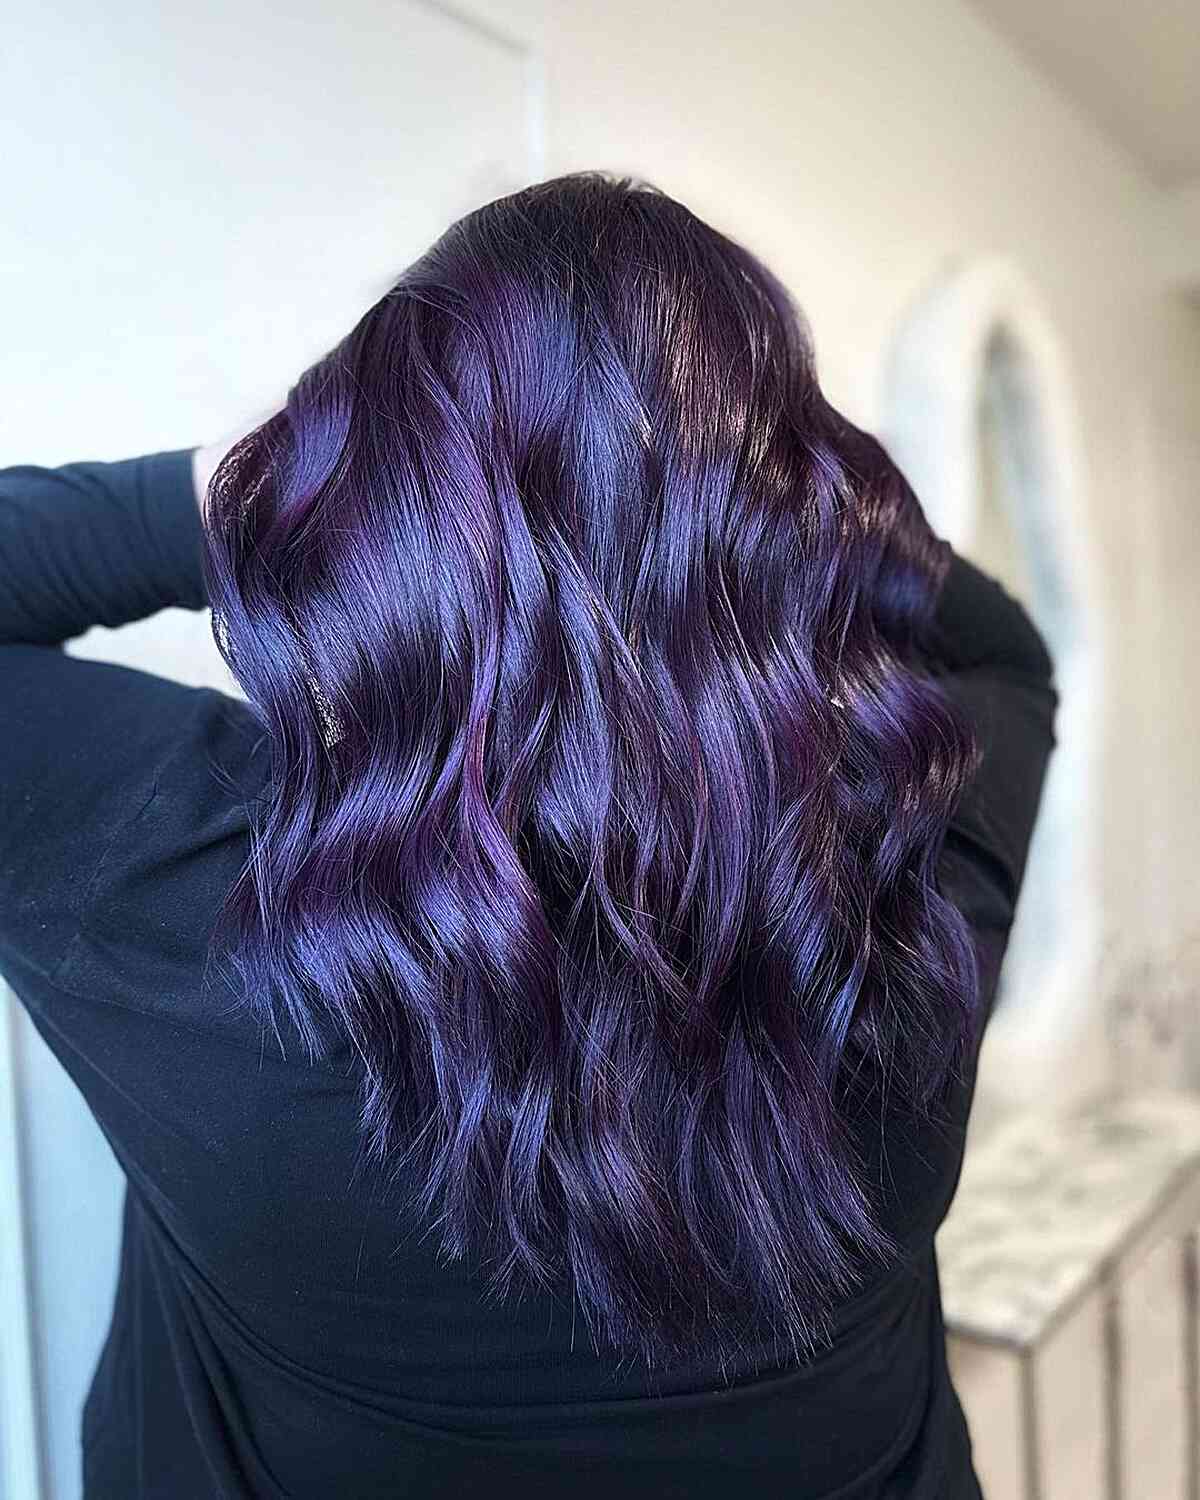 Stunning bold hair colours to try out this season - Kemi Filani News